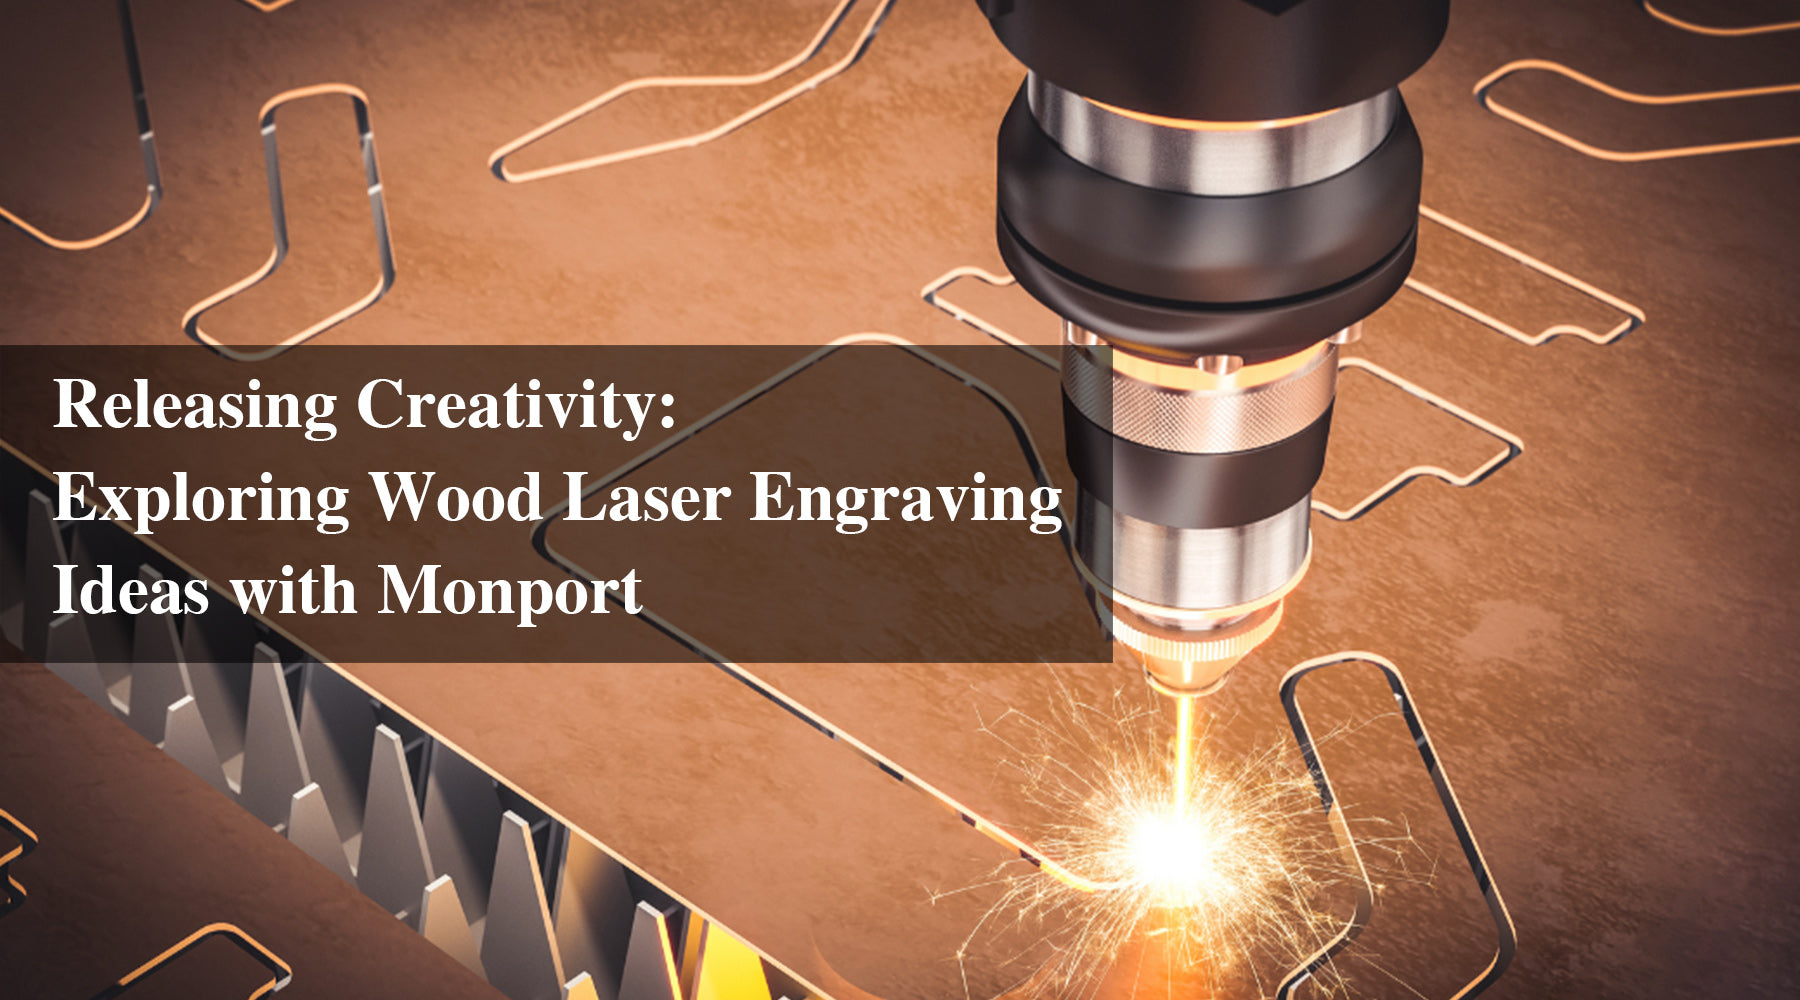 Releasing Creativity: Exploring Wood Laser Engraving Ideas with Monport